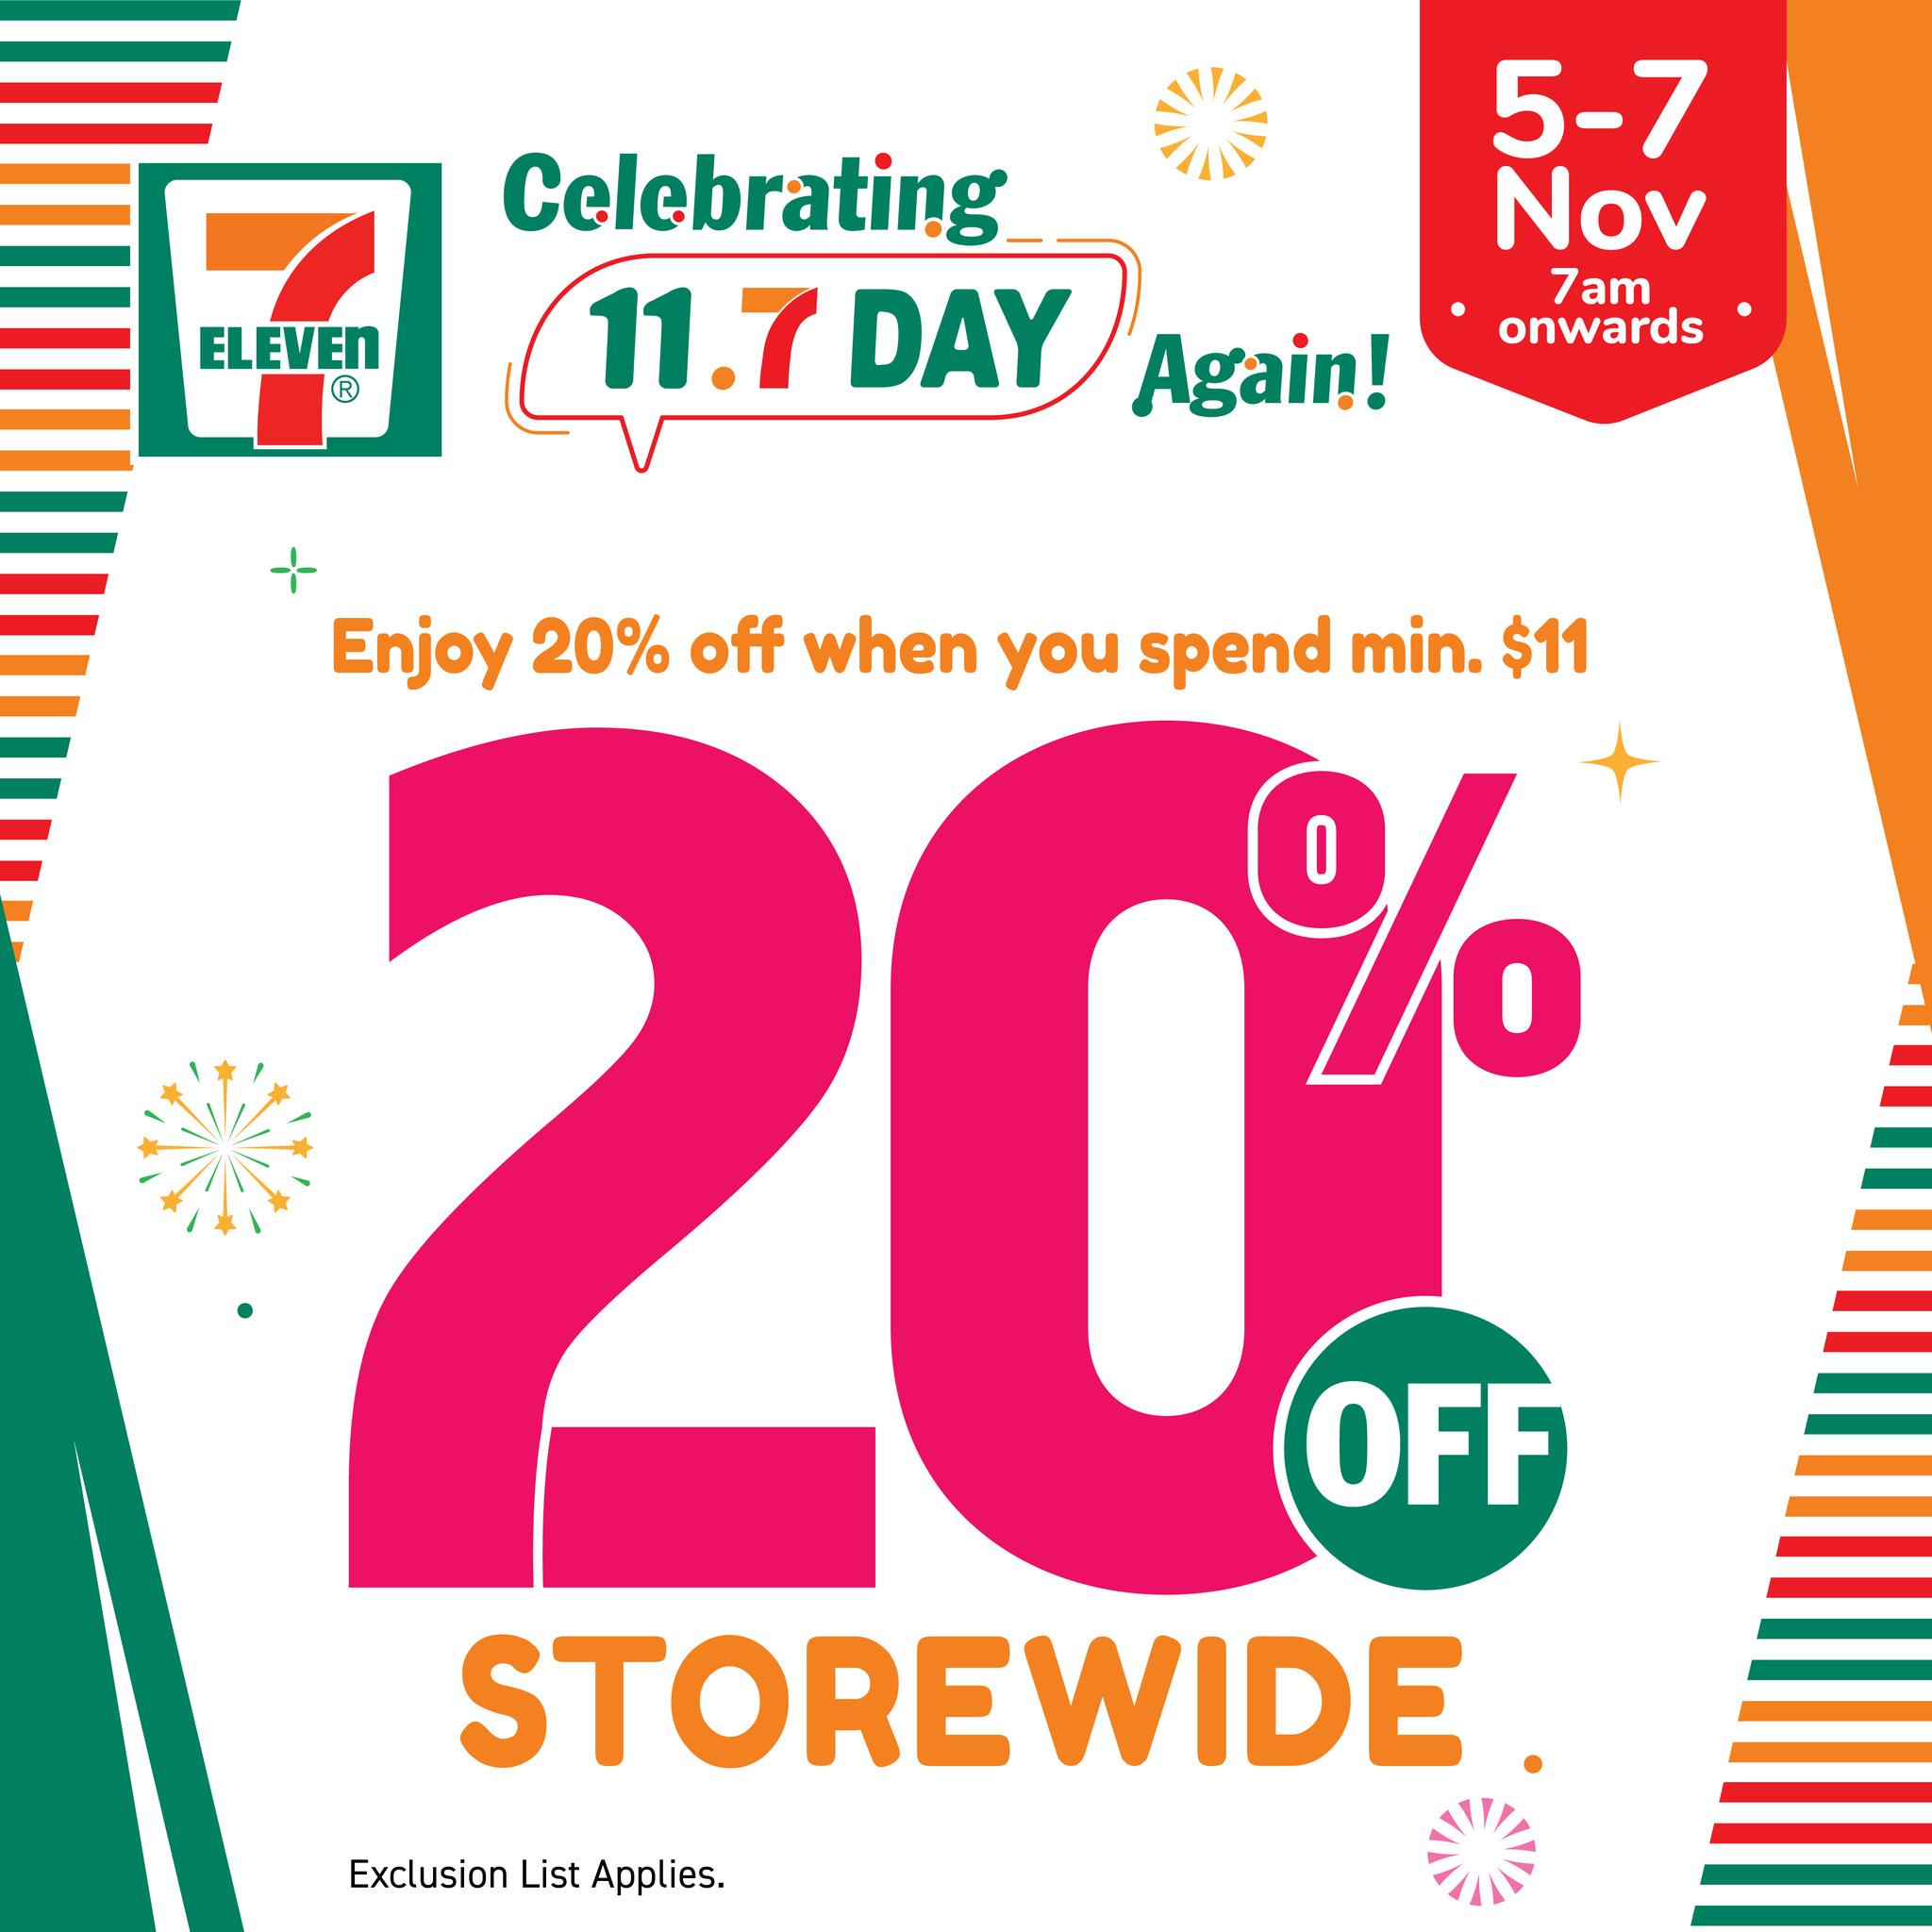 Lobang: 7-Eleven S'pore celebrates "11.7 Day" with FREE Mr Softee & 20% OFF Storewide promotions from 5 - 7 November 2022 - 3